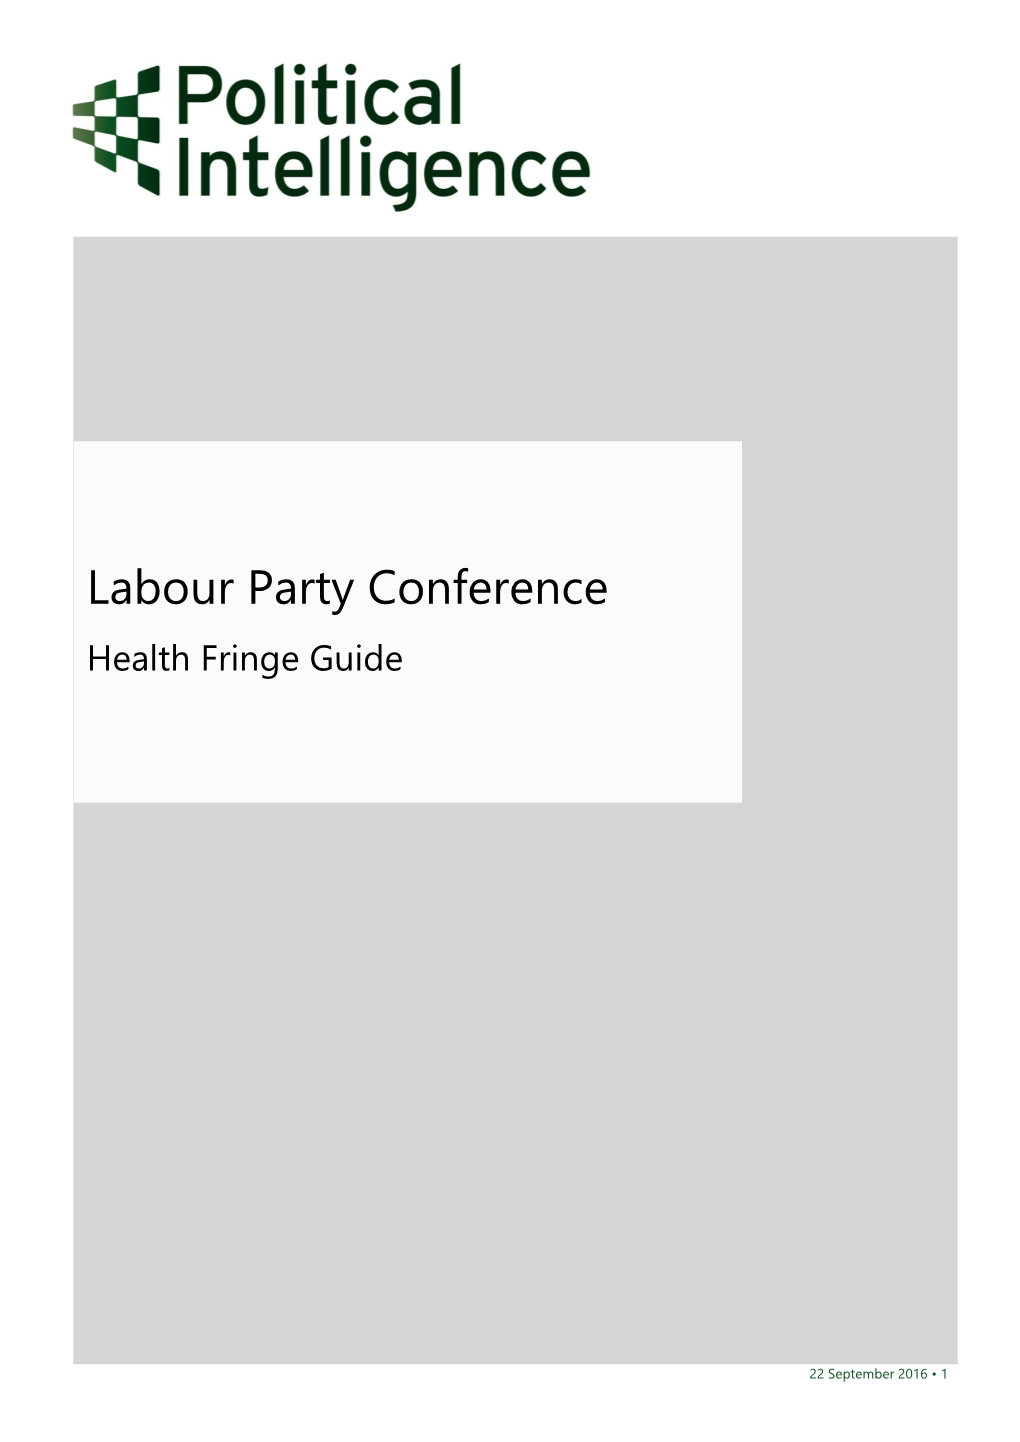 Labour Party Conference Health Fringe Guide